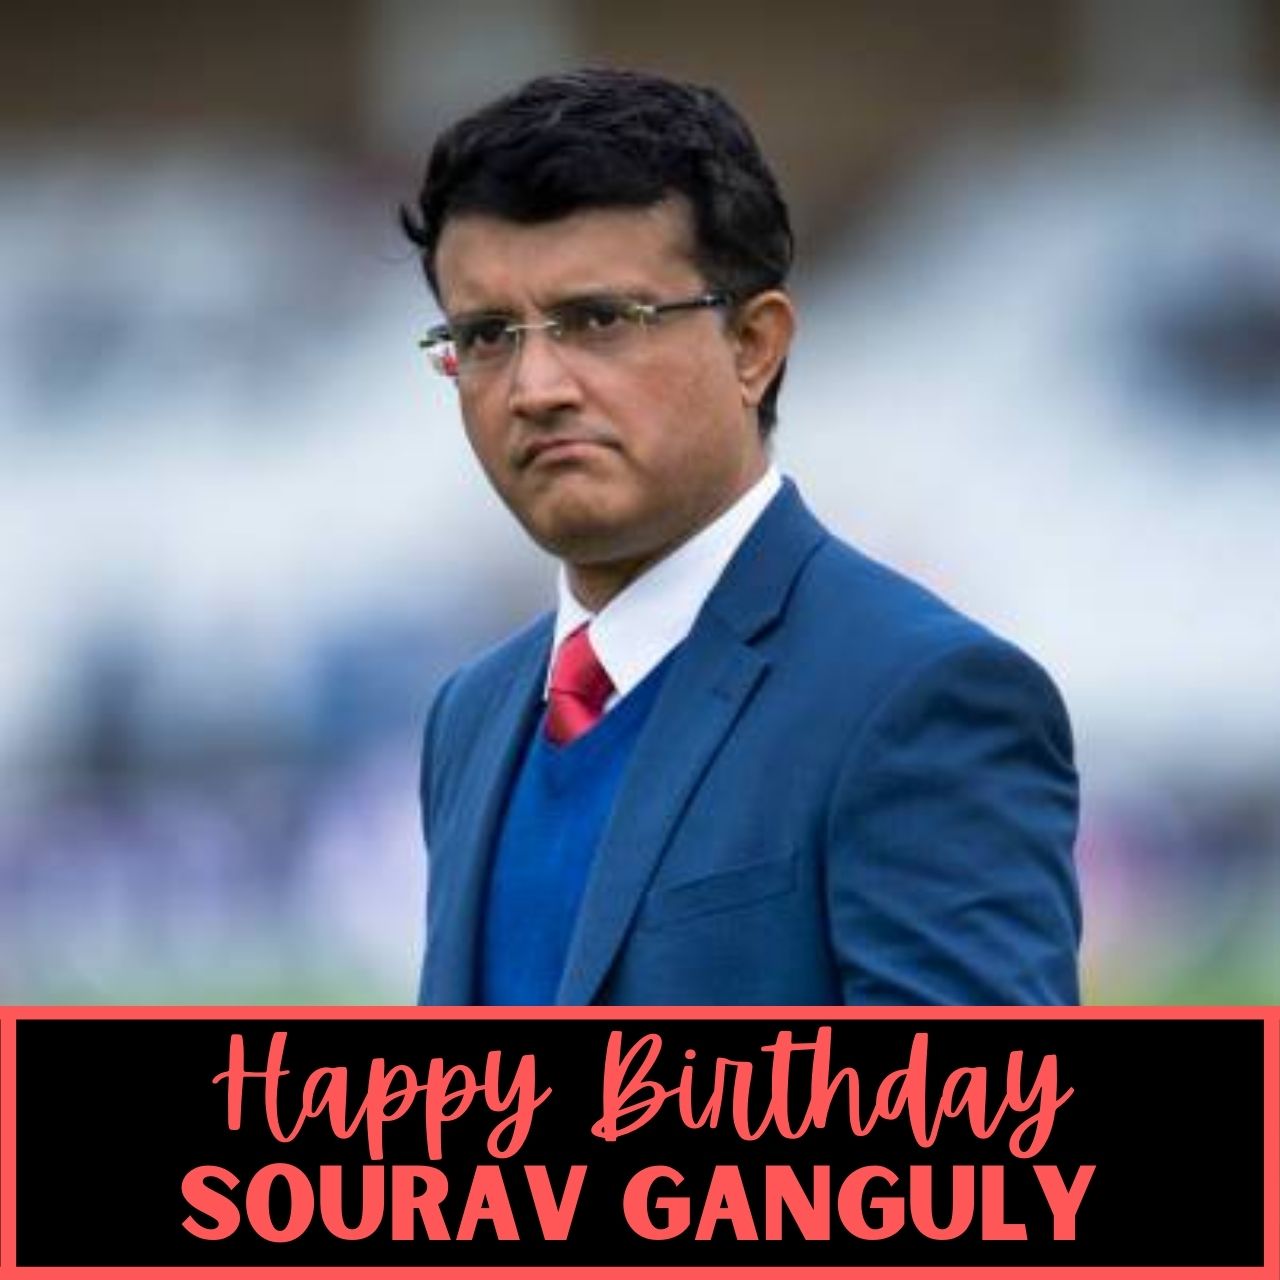 Happy Birthday Sourav Ganguly: wishes, photos (pic), Quotes, Tweets, and WhatsApp Status Video to Download to greet 'Dada'